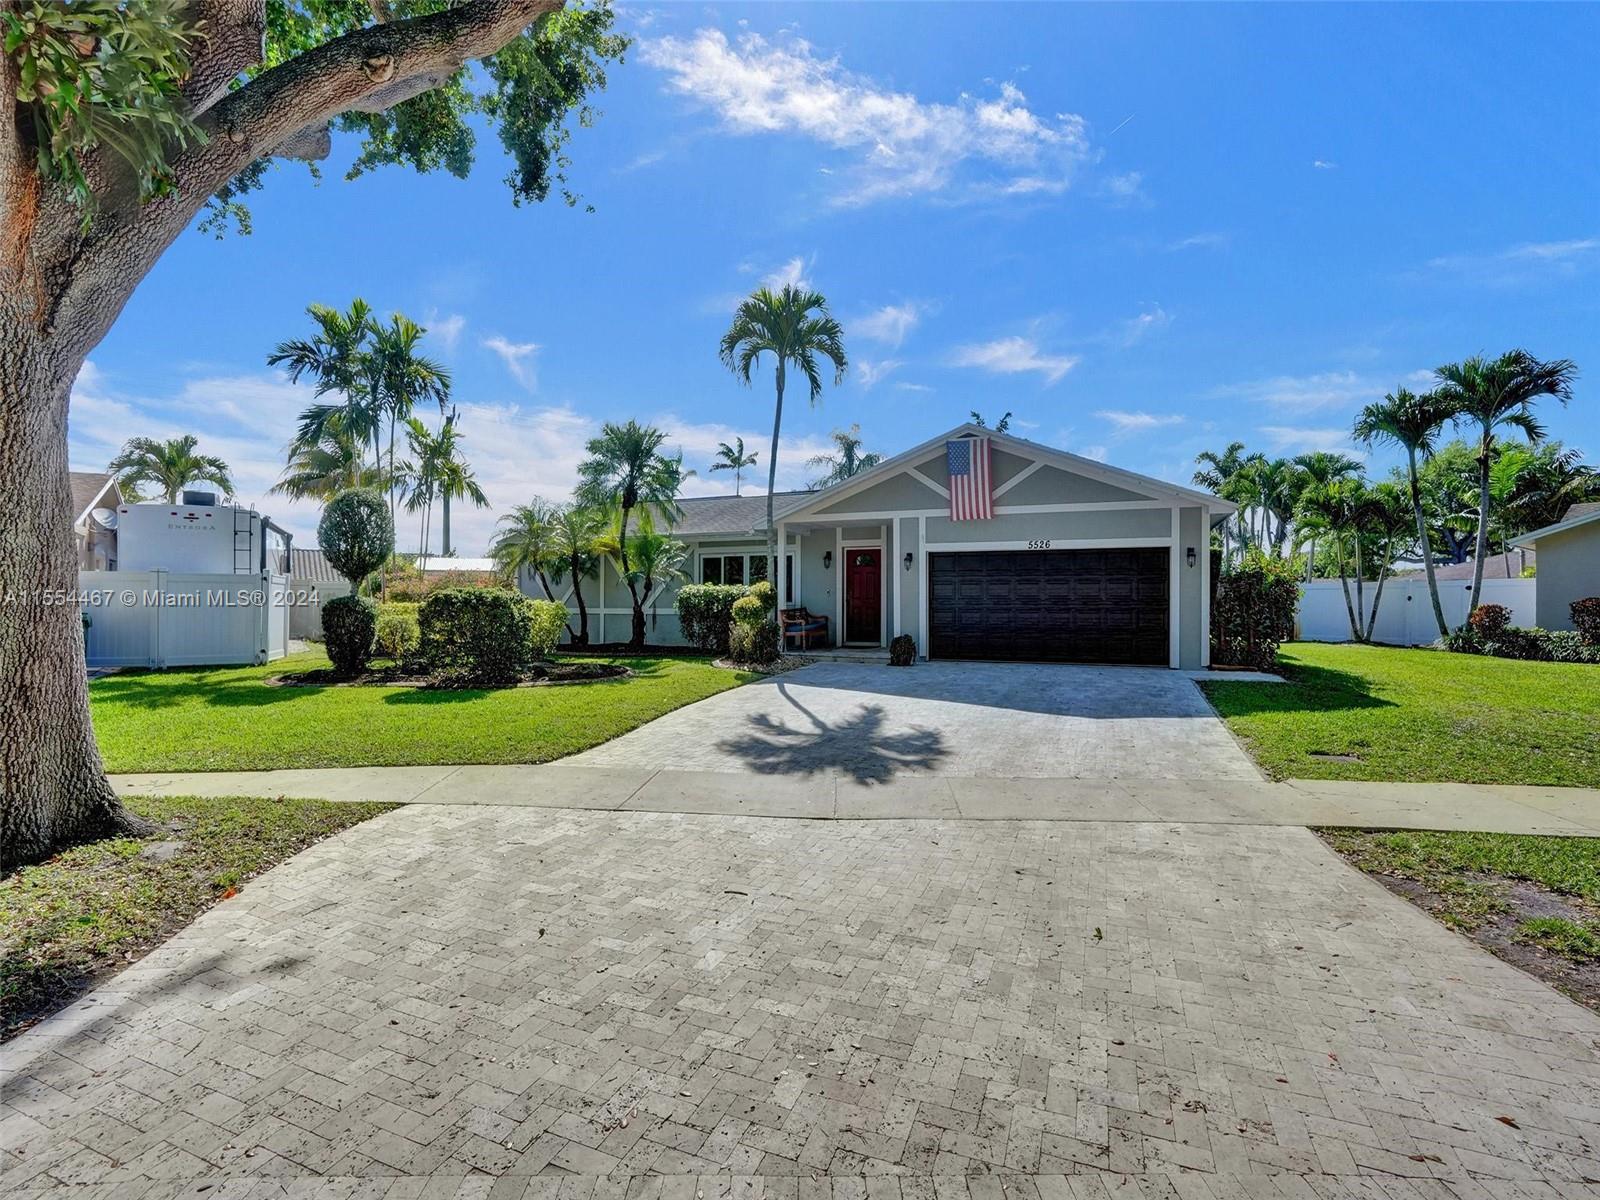 5526 SW 115th Ave, Cooper City, Florida 33330, 3 Bedrooms Bedrooms, ,2 BathroomsBathrooms,Residential,For Sale,5526 SW 115th Ave,A11554467